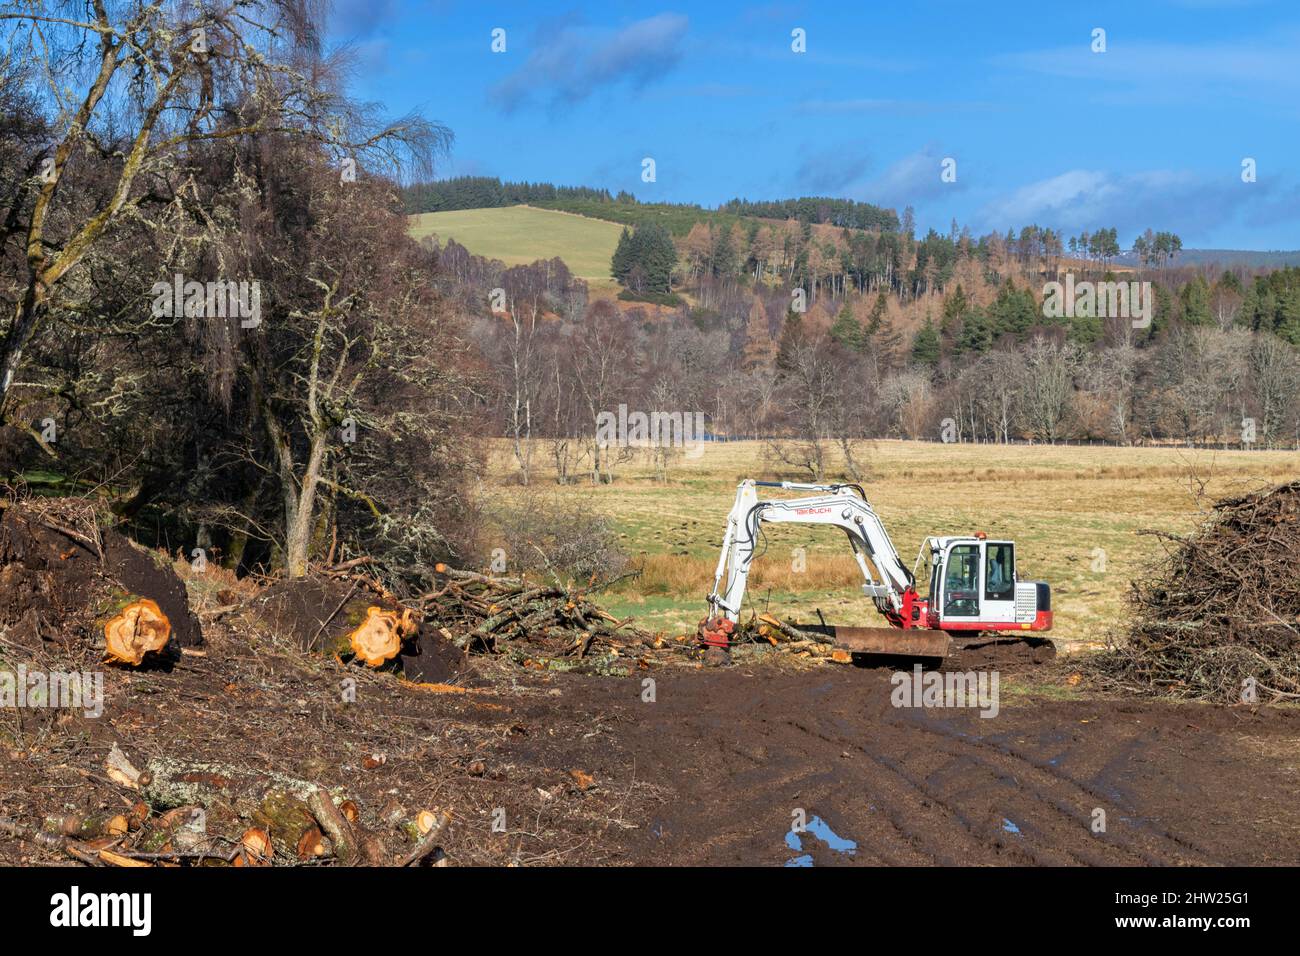 CUTTING AND CLEARING FALLEN TREES WITH A TAKEUCHI MECHANICAL SAW AND TRACKED BULLDOZER OR EXCAVATOR Stock Photo